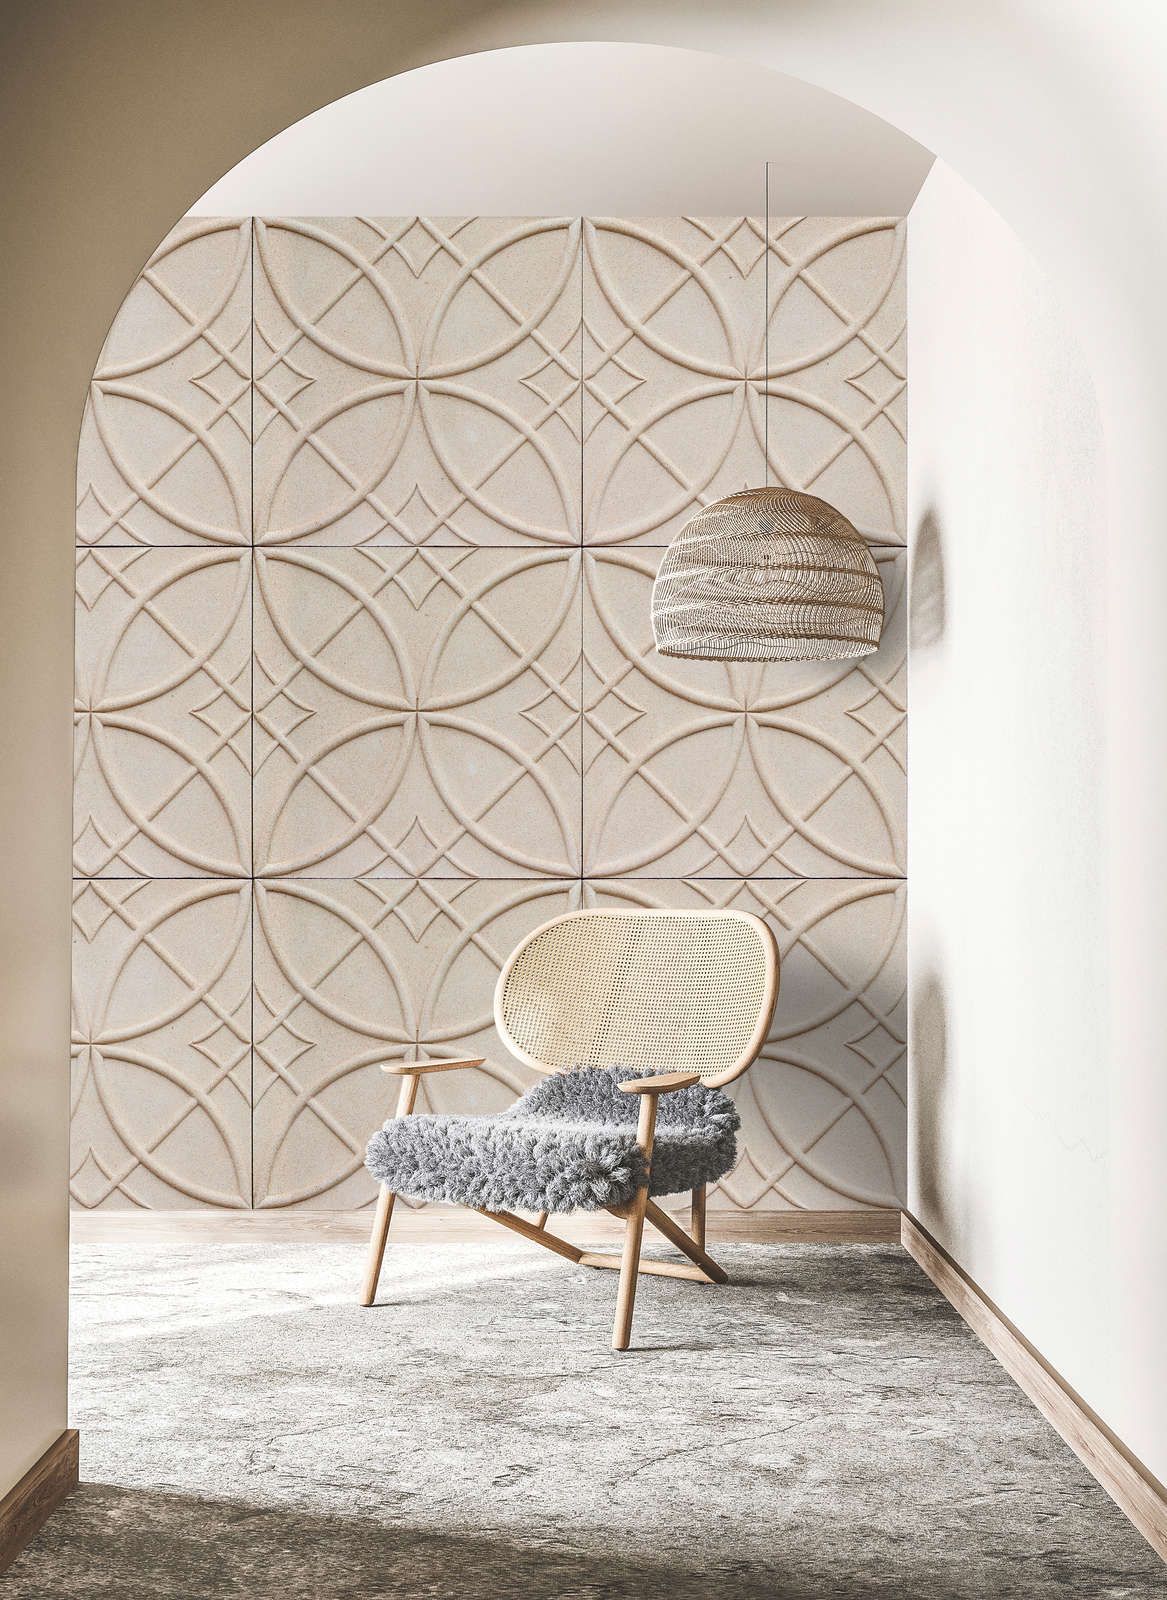             Photo wallpaper »circulus« - Circular pattern on tile look with 3D effect - Lightly textured non-woven fabric
        